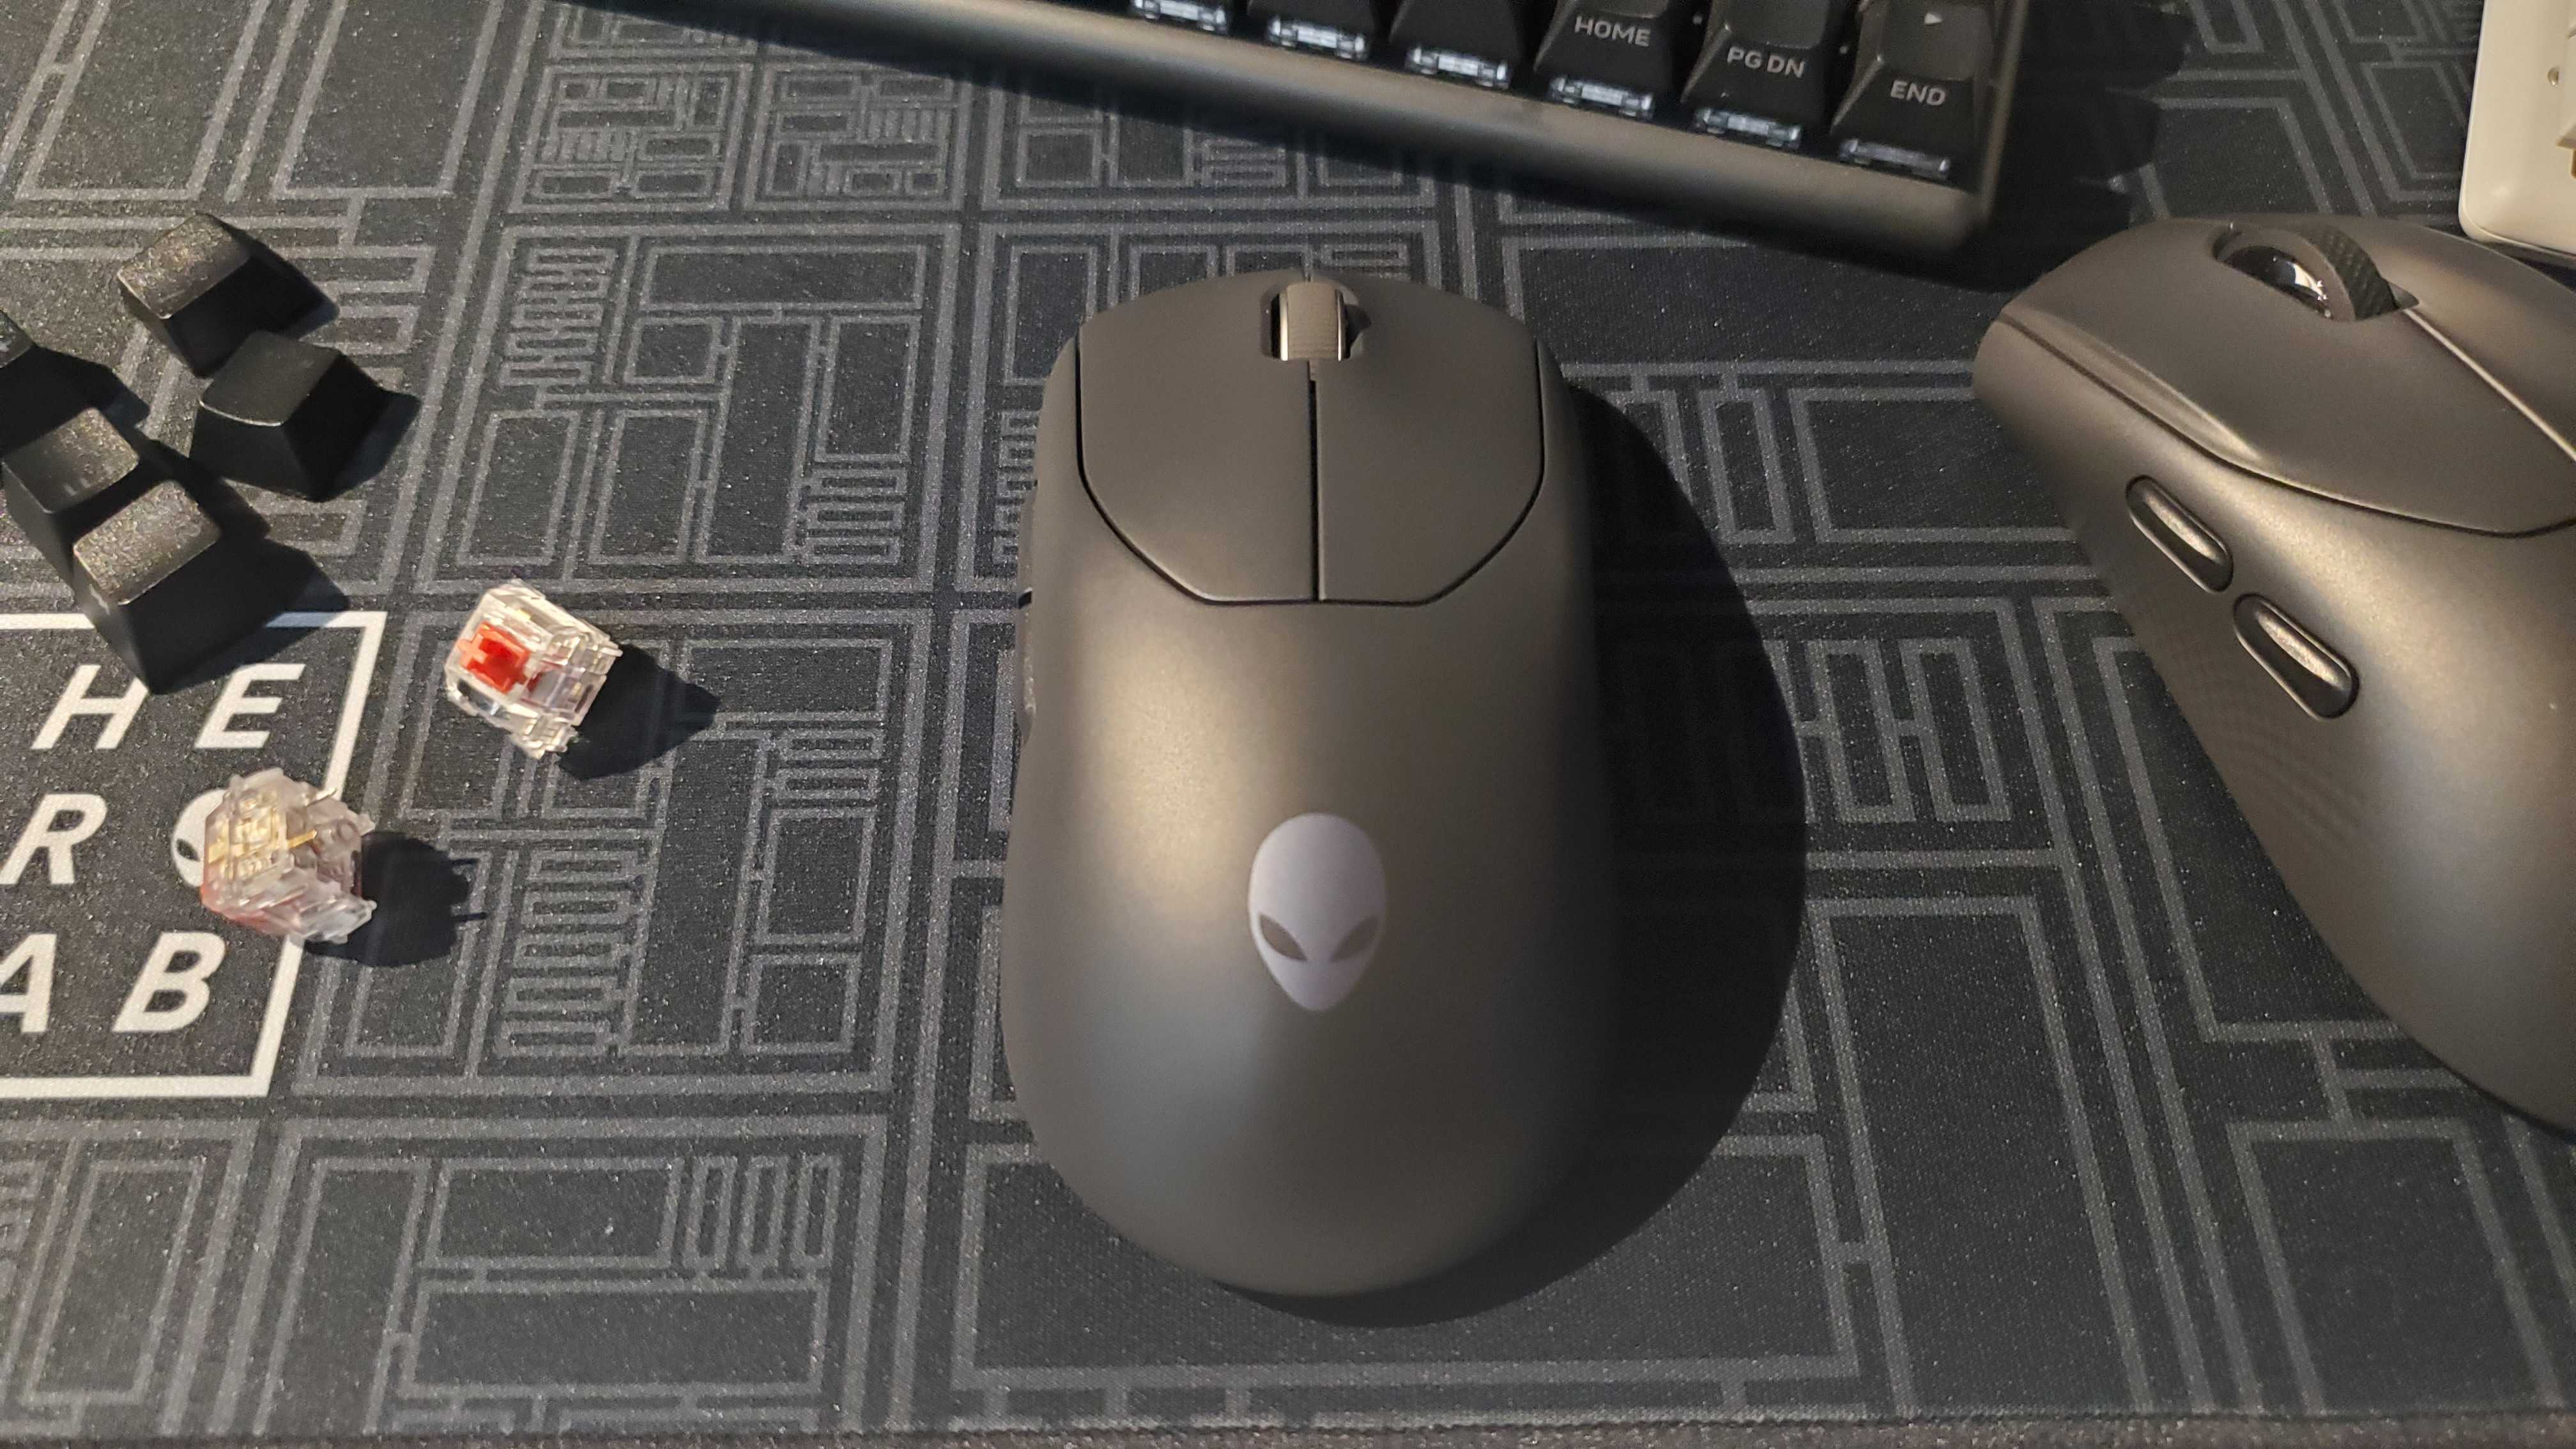 black gaming mouse